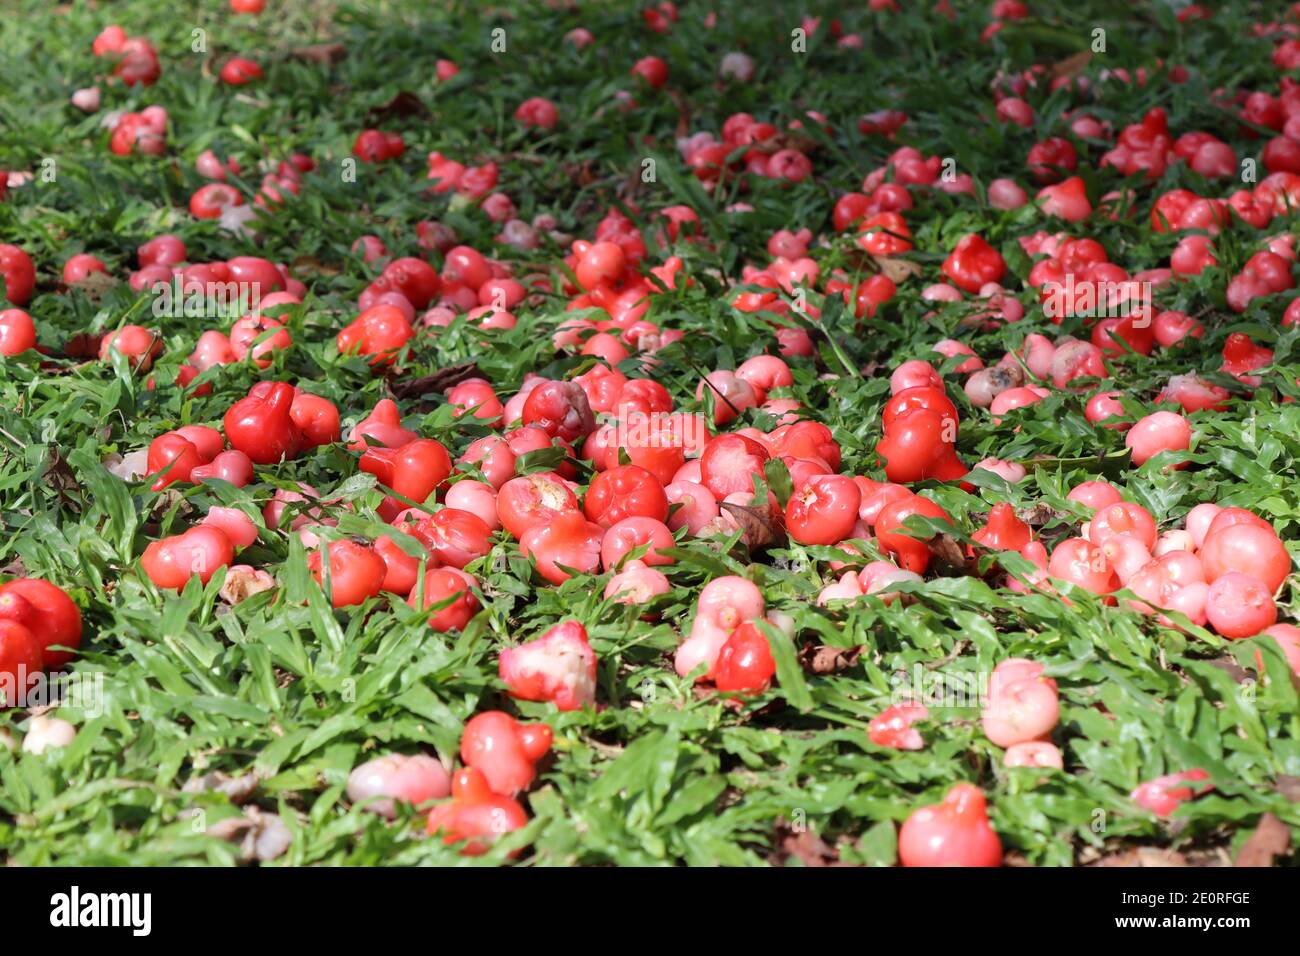 The jumbu fruits have fallen to the ground and are scattered under the jumbu tree. It makes color deference between green and red. Stock Photo